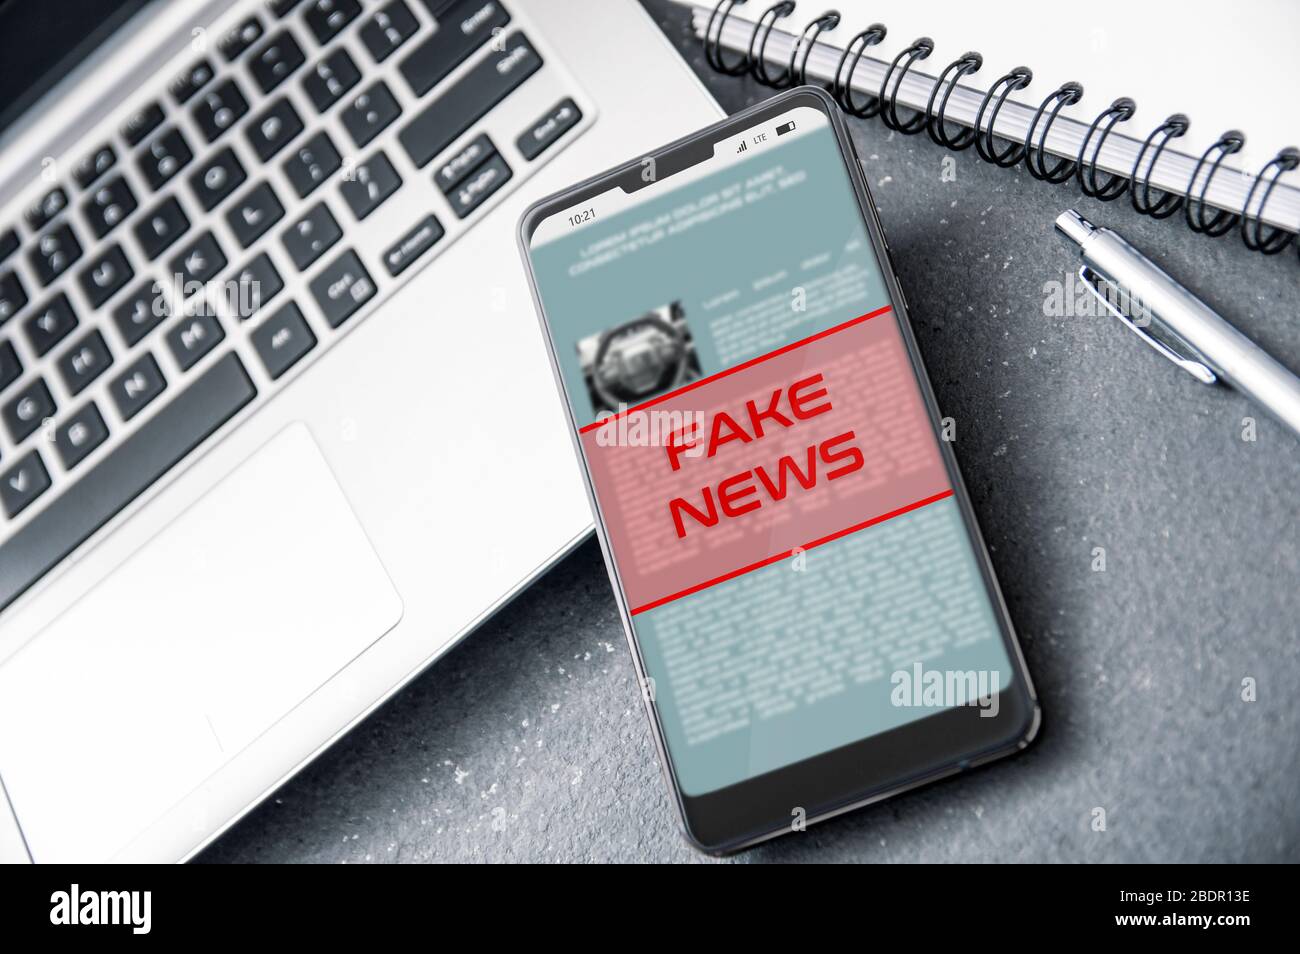 Laptop and smartphone with 'fake news' alert on the screen. Conception of increasing level of fake news. Stock Photo